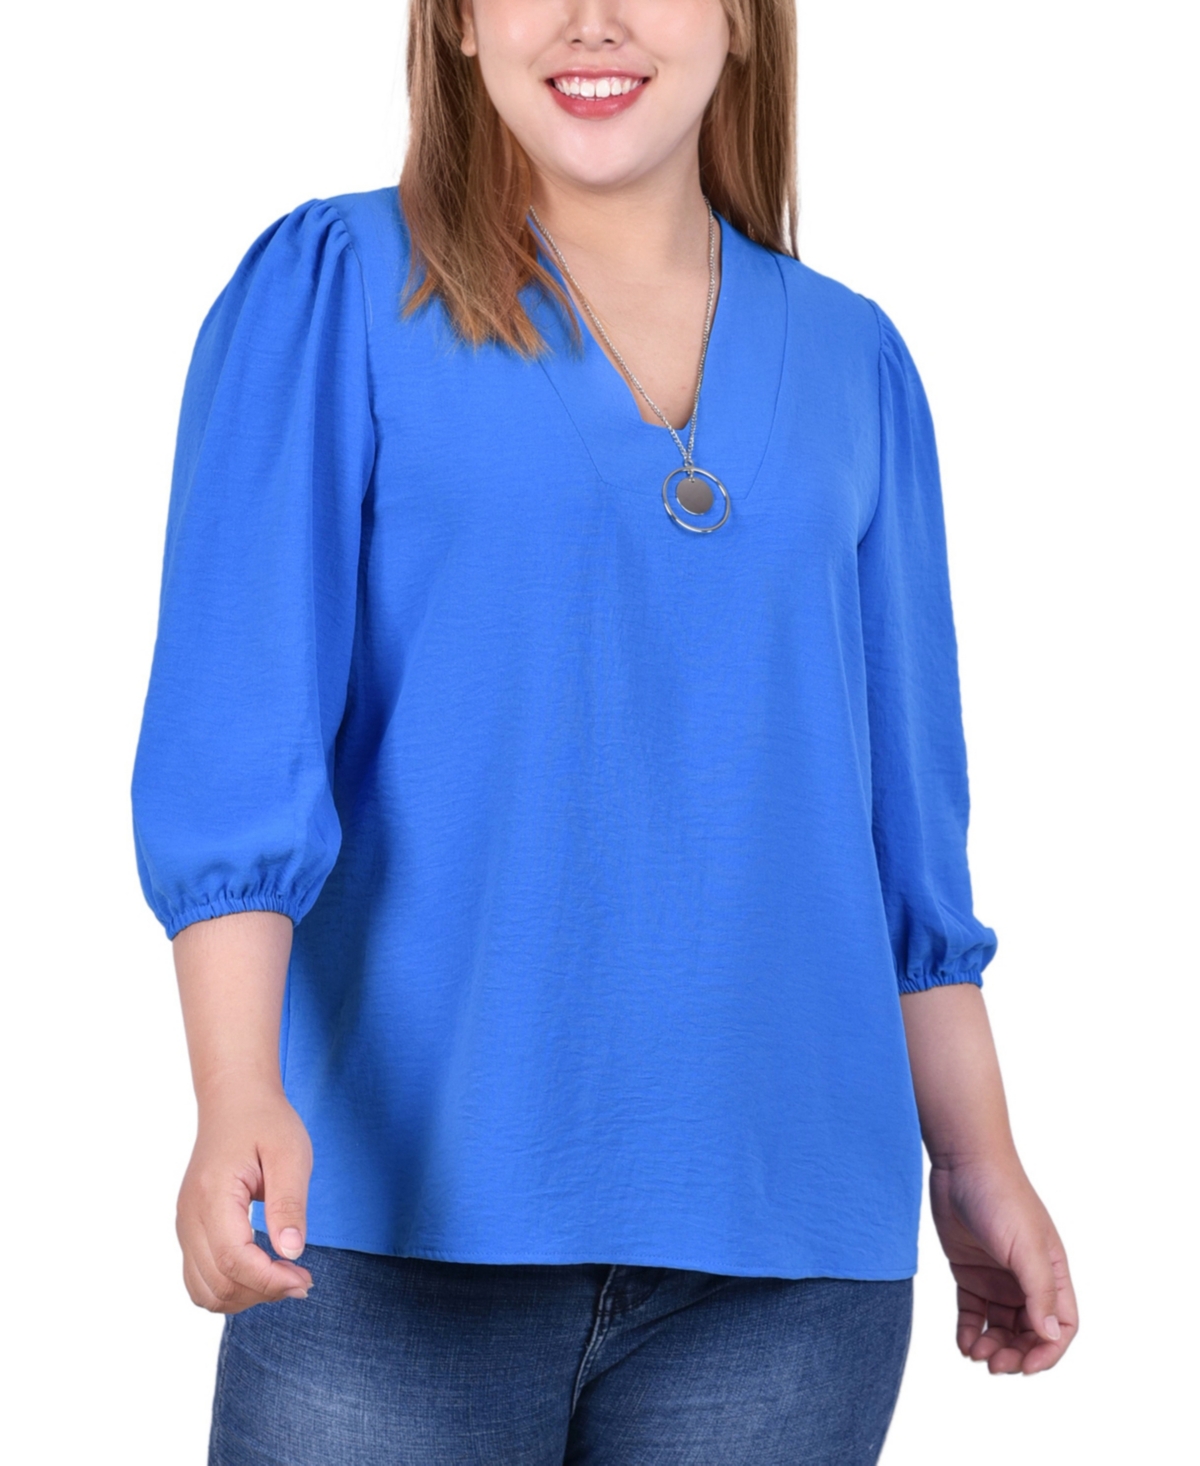 Plus Size 3/4 Puff Sleeve Top with Detachable Necklace - Marigold